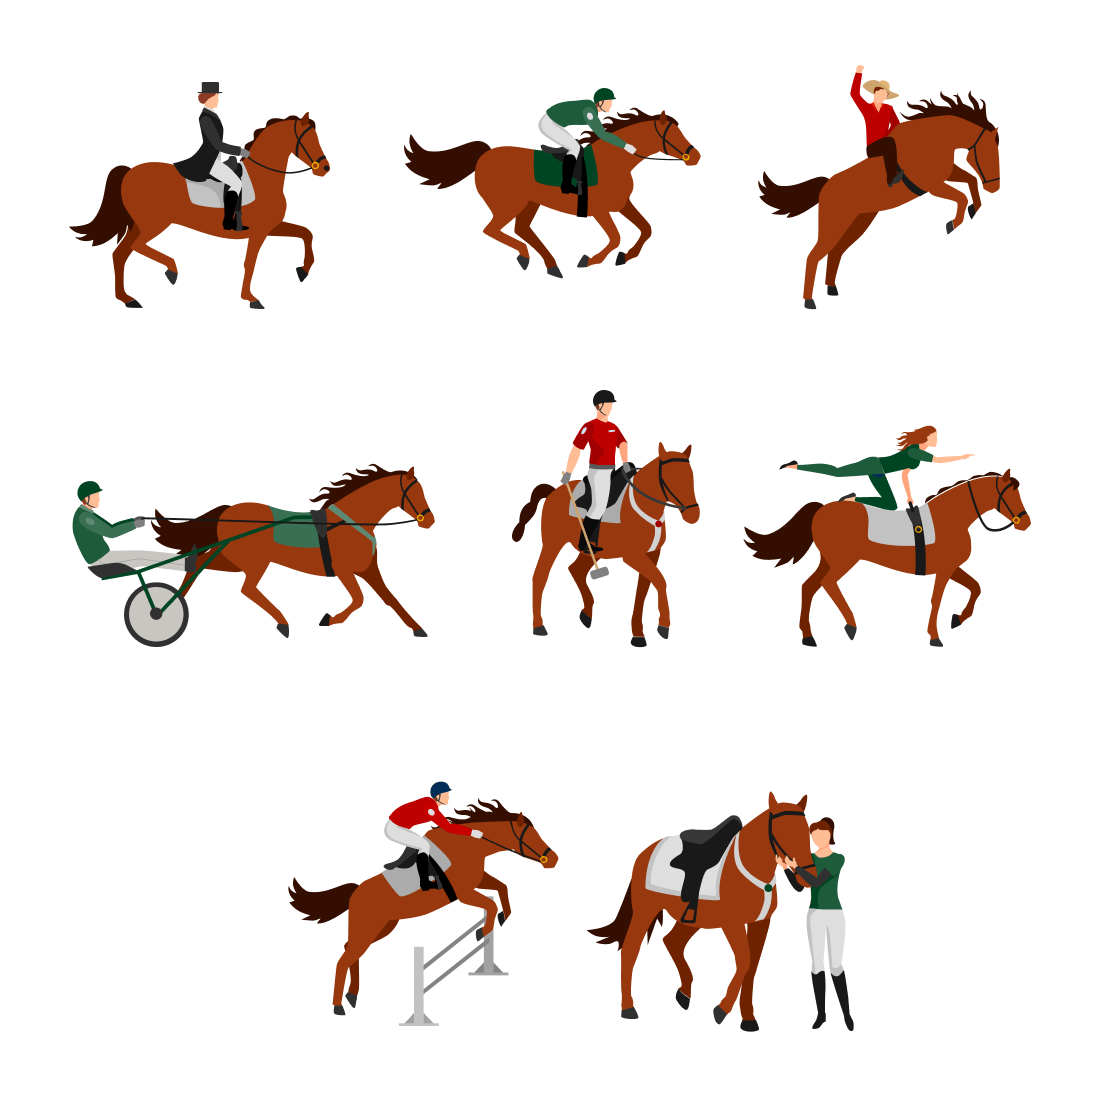 Group of people riding on the backs of horses.